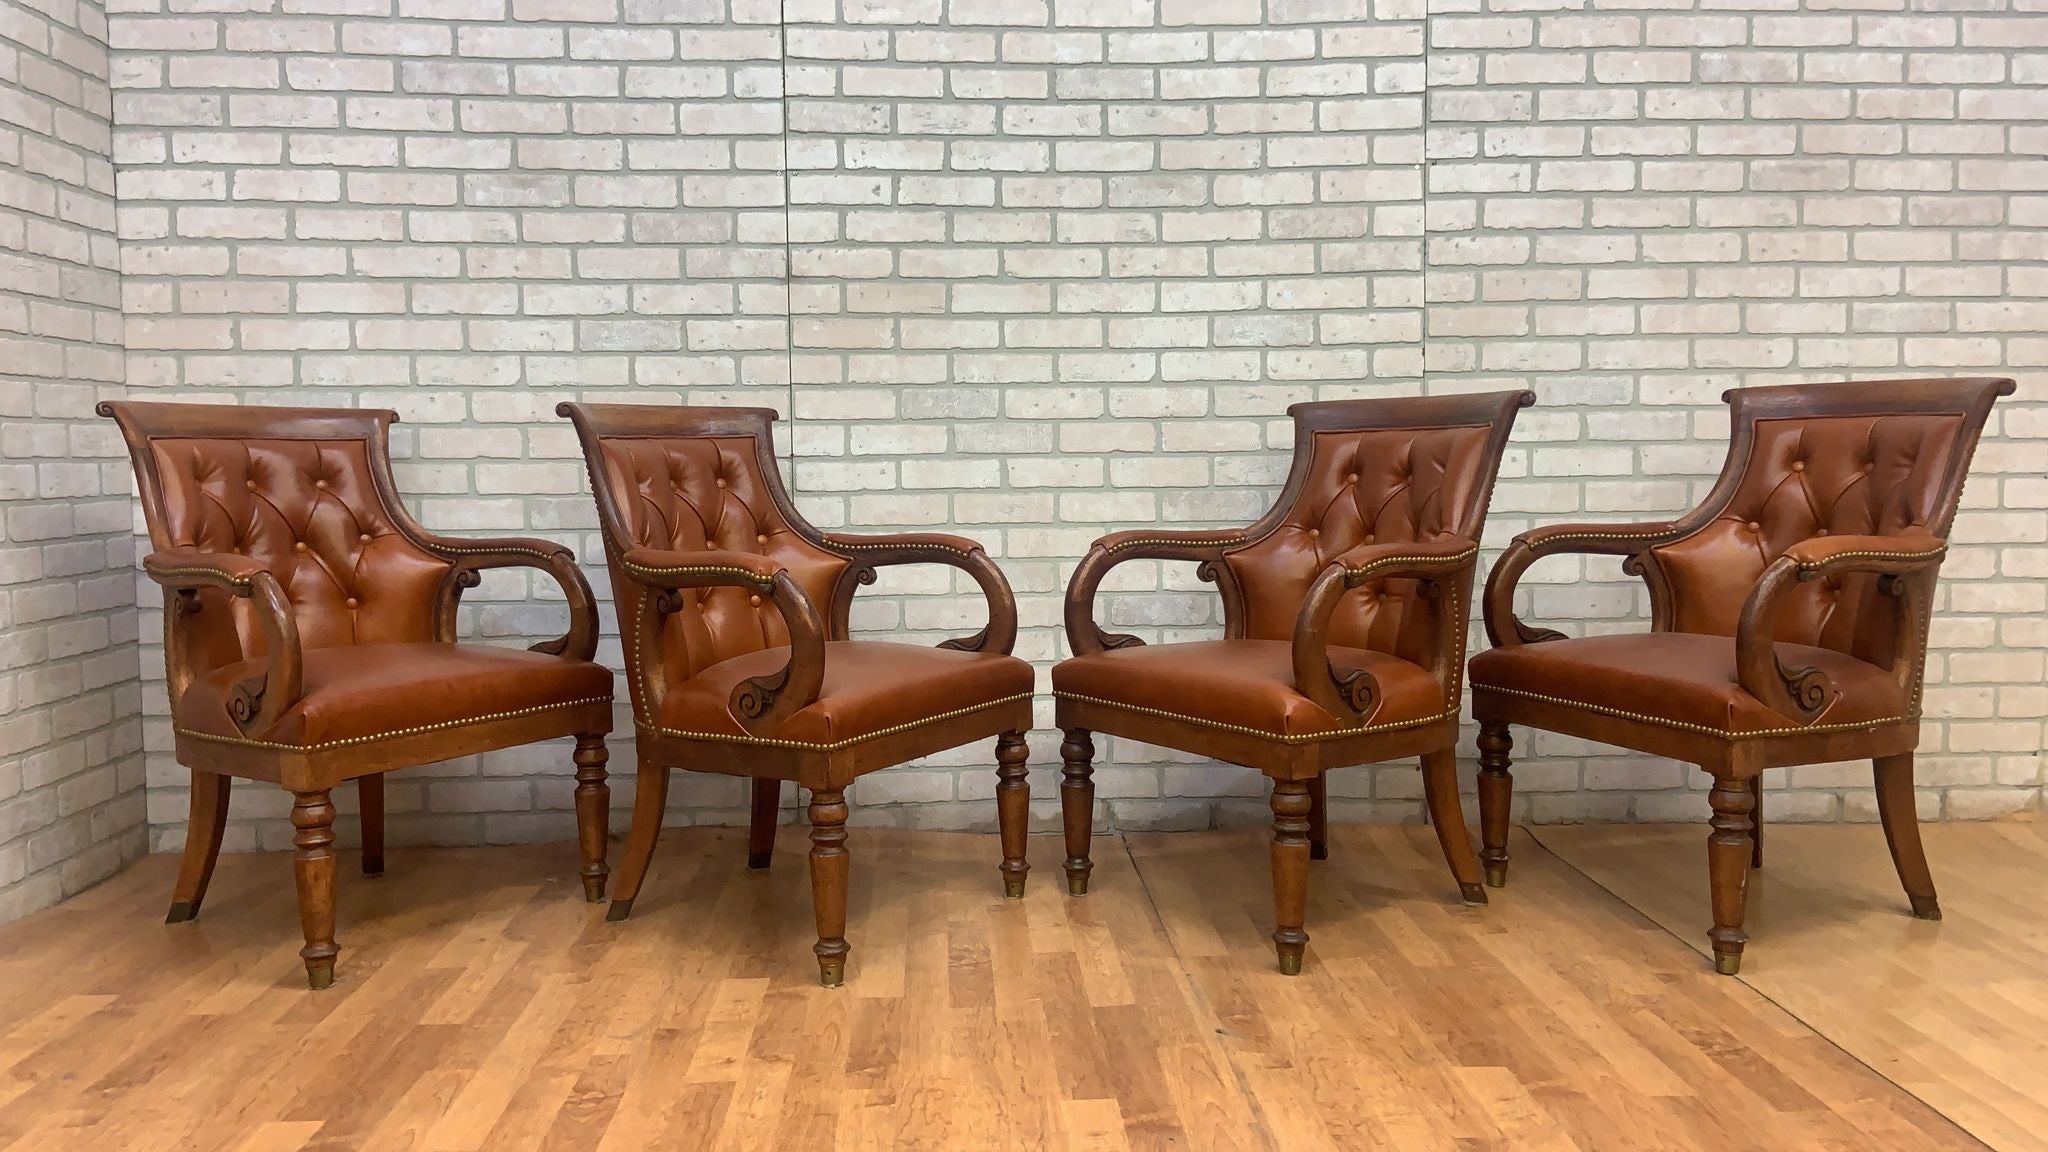 Vintage Hancock and Moore Tufted Jockey Club Chair Newly Upholstered in Leather - Set of 4